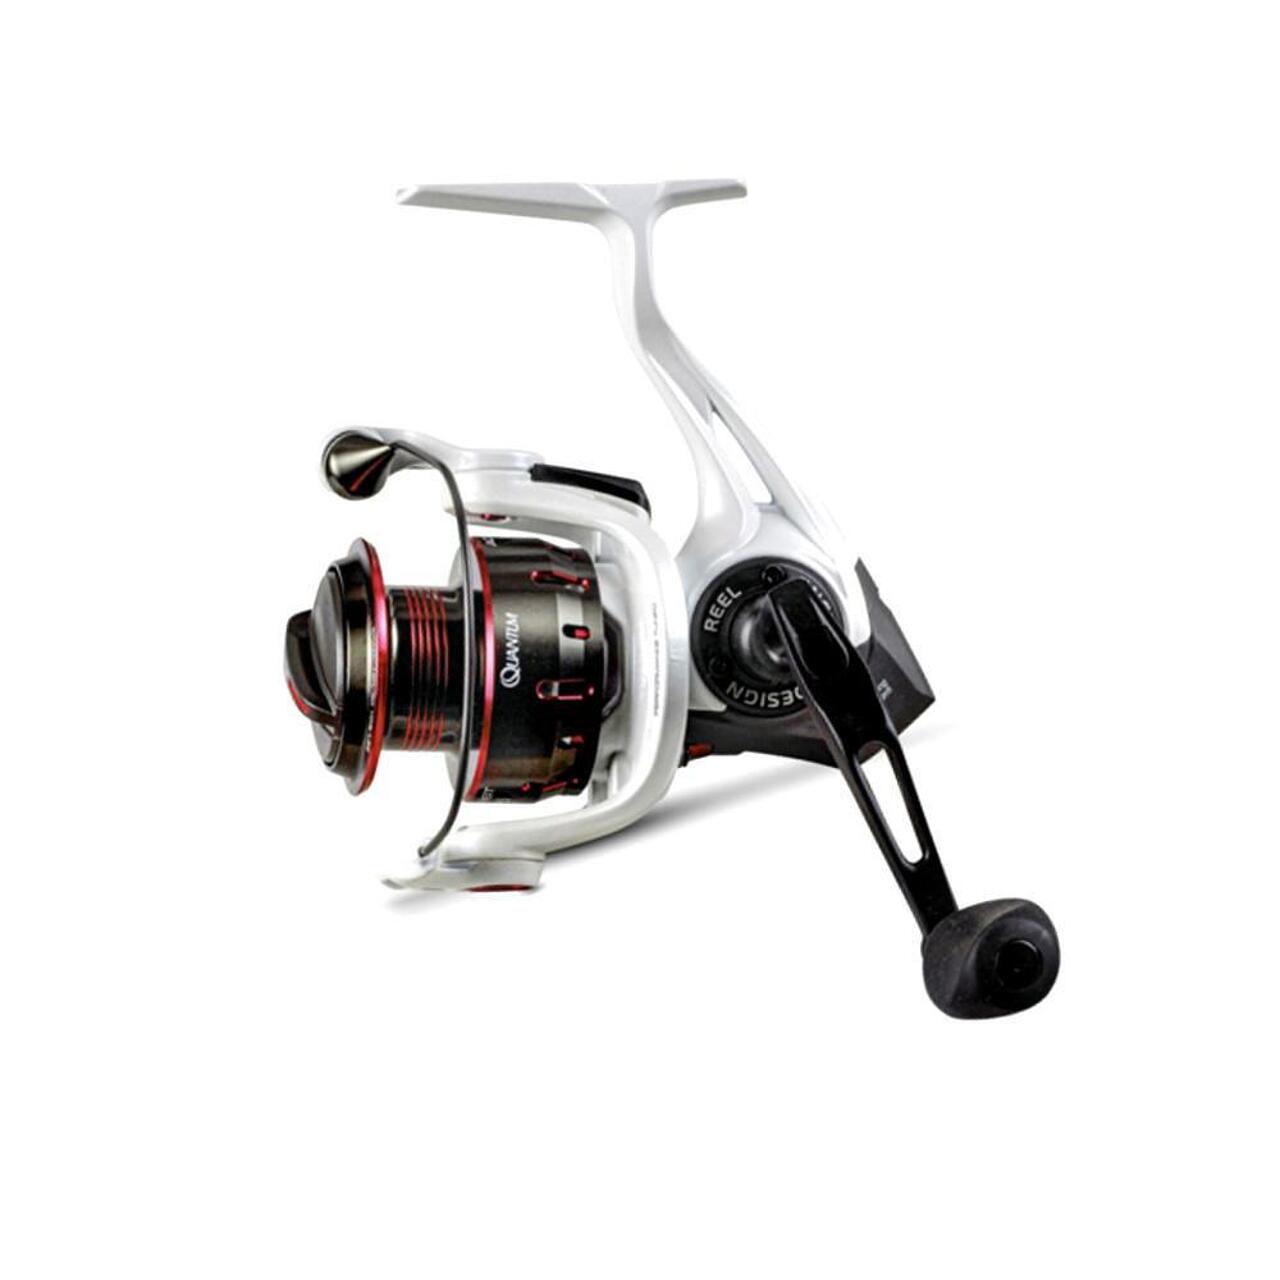 Unified Size: 2500 - Fishing Reels - Front Drag ✴️ GREAT PRICES